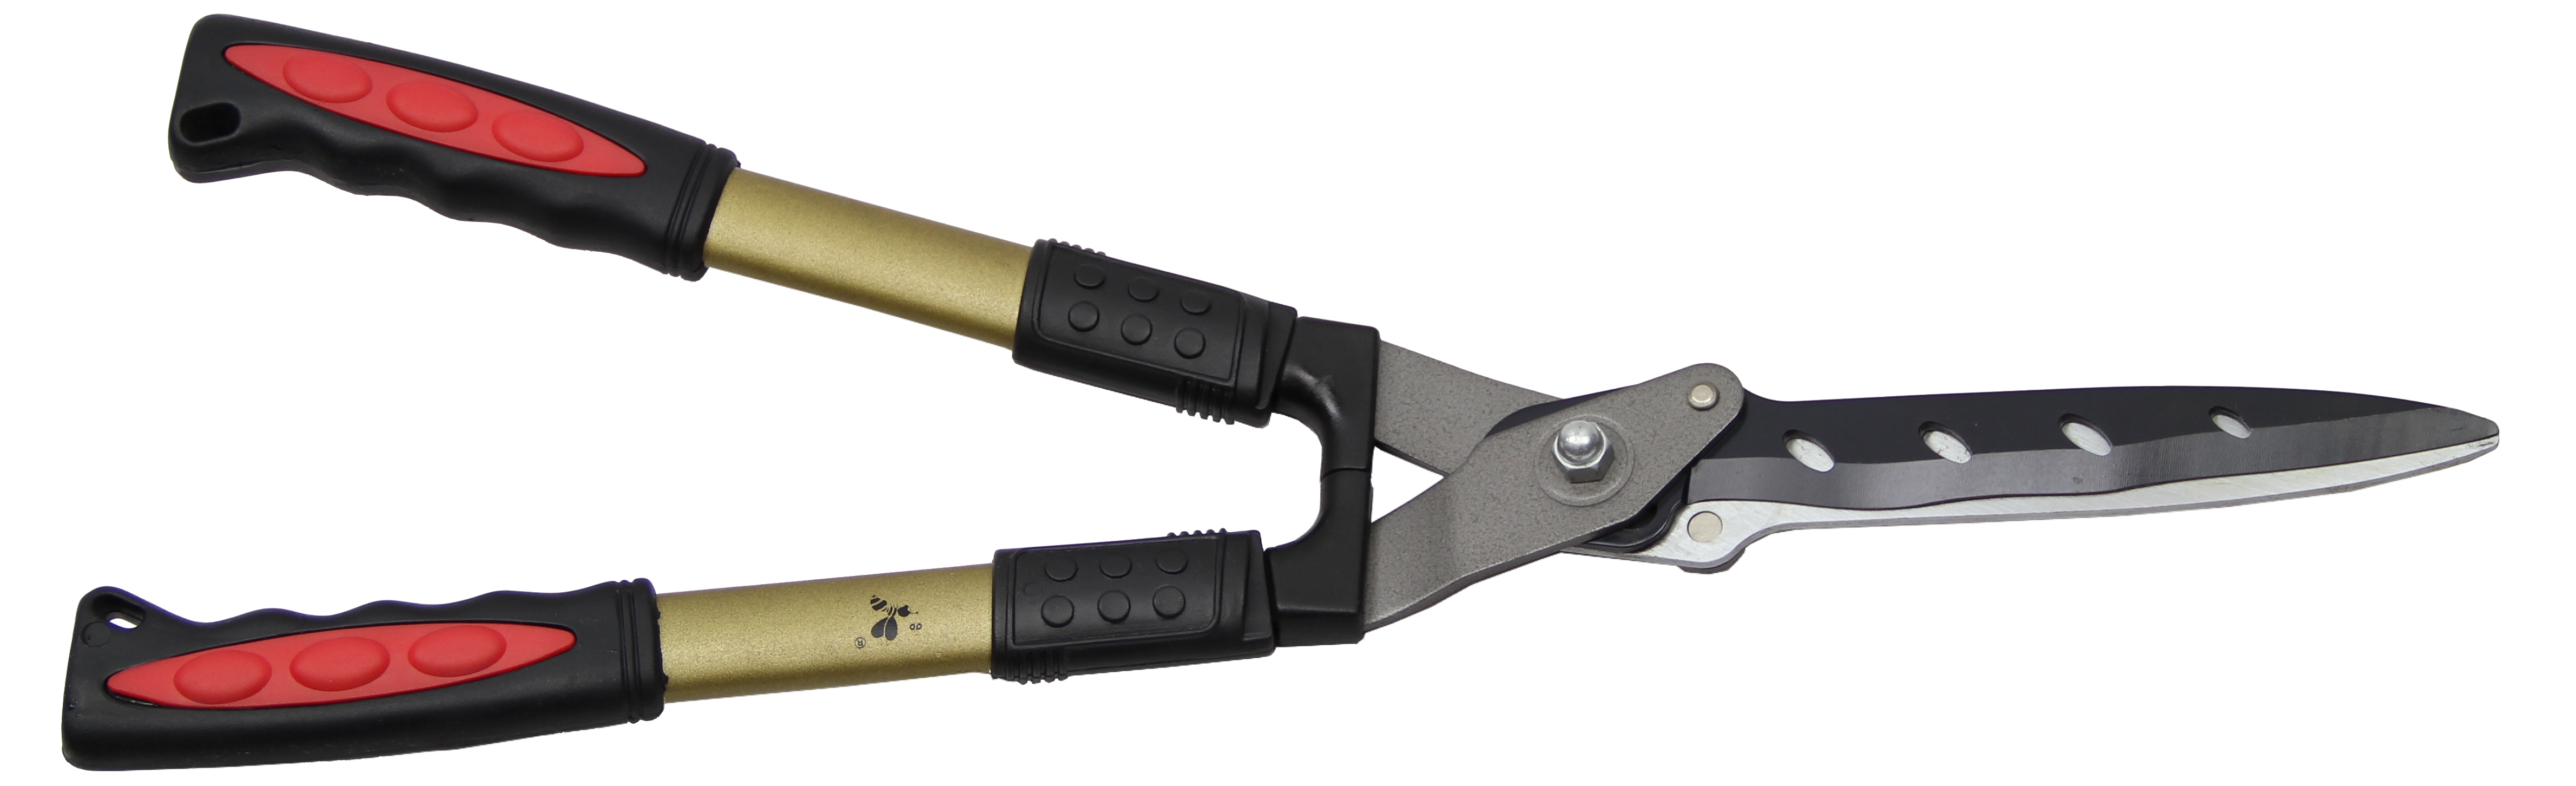 Compound Action Wavy Hedge Shears